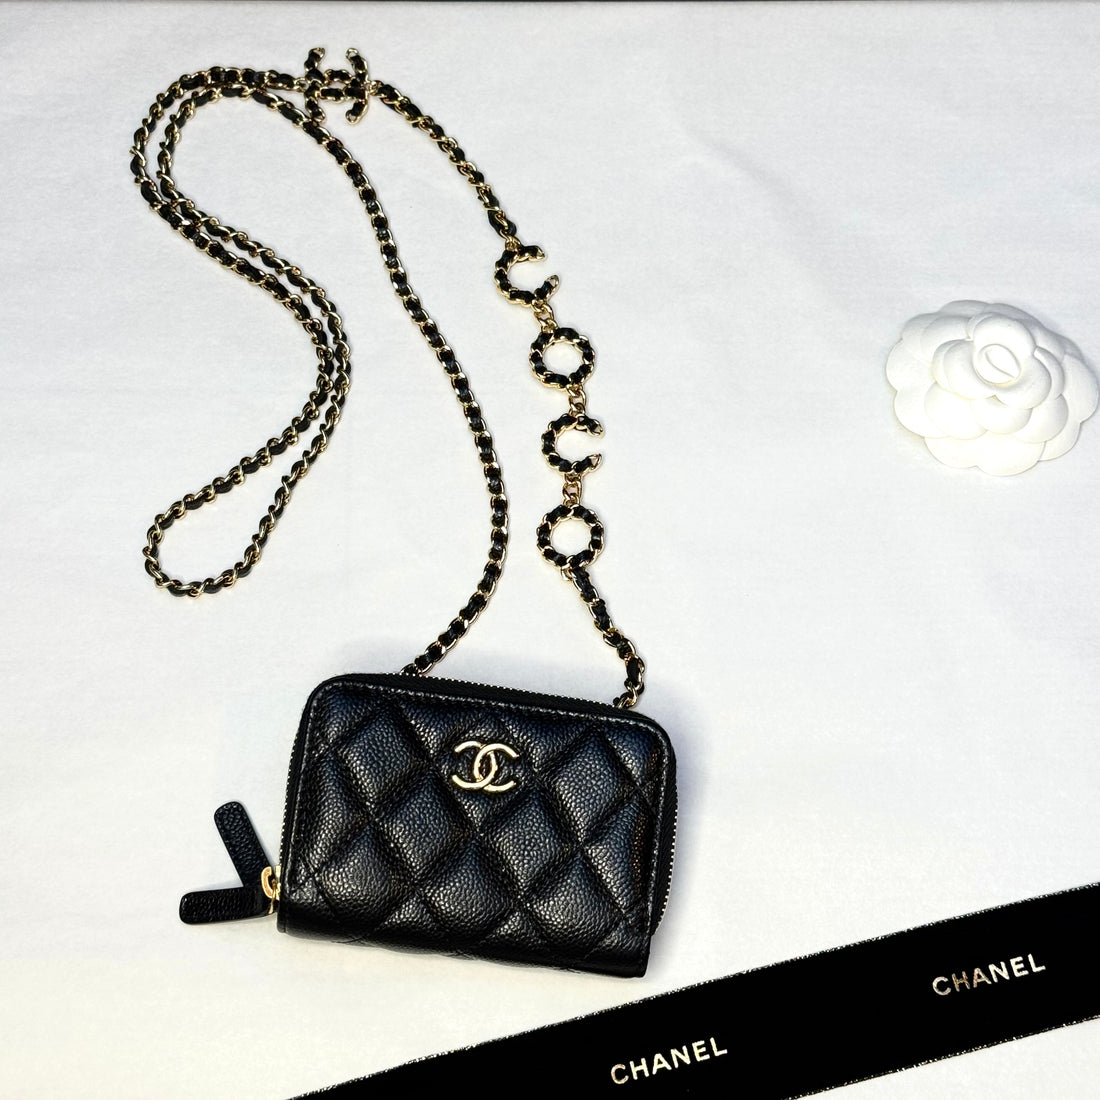 Chanel - Portefeuille wallet on chain